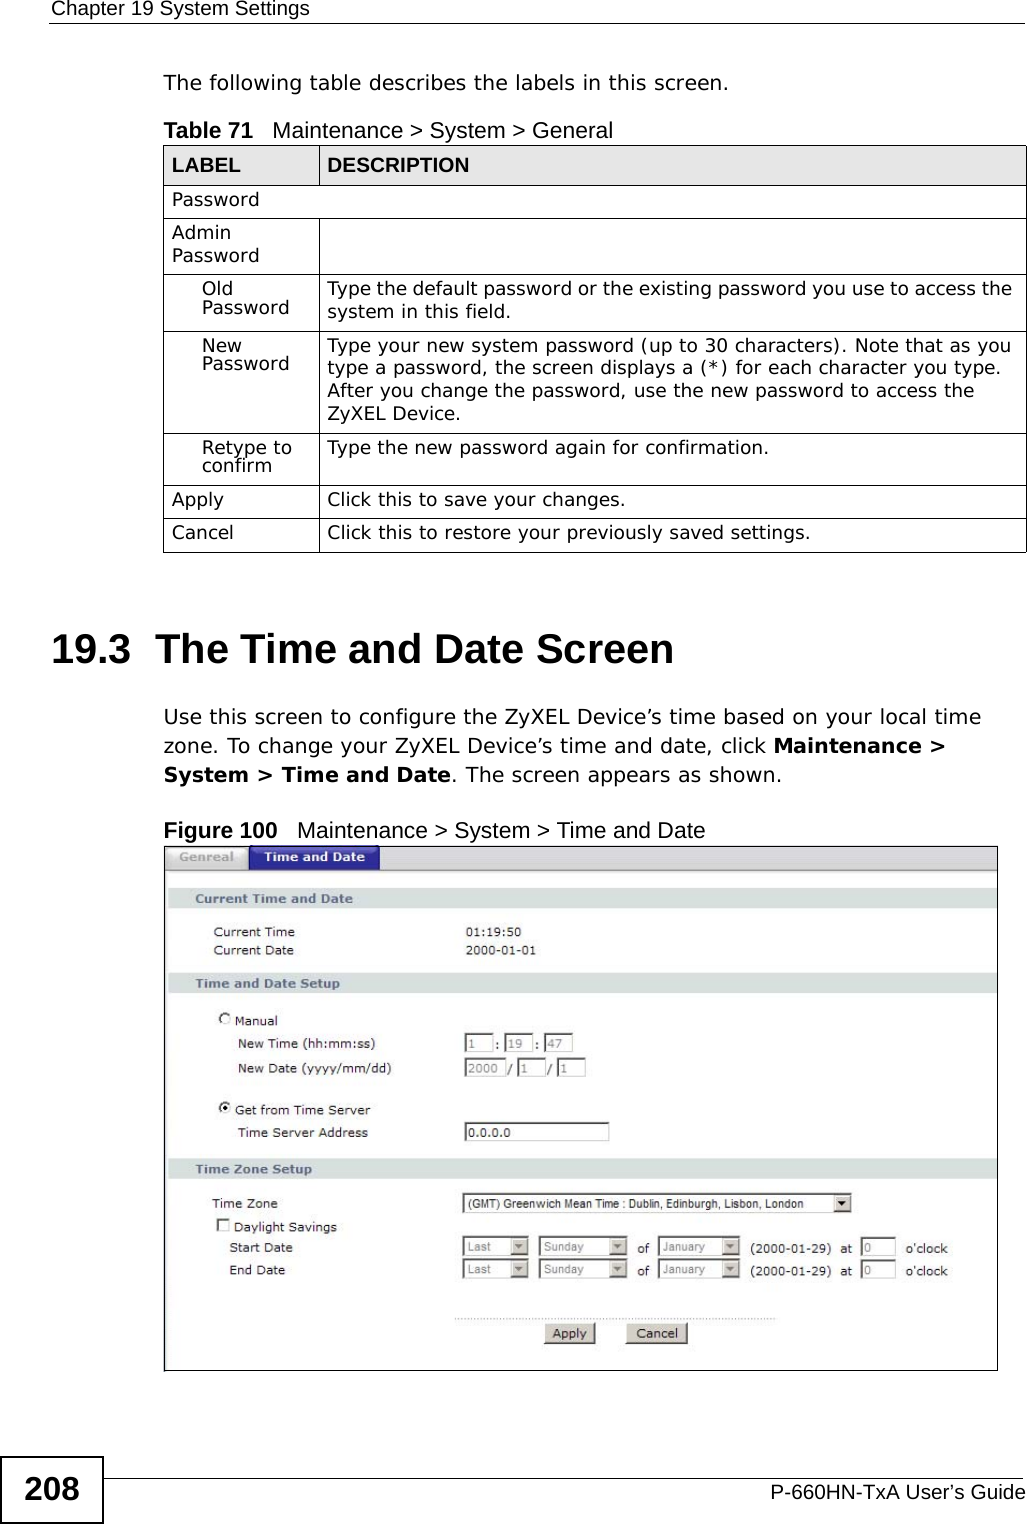 Chapter 19 System SettingsP-660HN-TxA User’s Guide208The following table describes the labels in this screen. 19.3  The Time and Date Screen Use this screen to configure the ZyXEL Device’s time based on your local time zone. To change your ZyXEL Device’s time and date, click Maintenance &gt; System &gt; Time and Date. The screen appears as shown.Figure 100   Maintenance &gt; System &gt; Time and DateTable 71   Maintenance &gt; System &gt; GeneralLABEL DESCRIPTIONPasswordAdmin PasswordOld Password Type the default password or the existing password you use to access the system in this field.New Password Type your new system password (up to 30 characters). Note that as you type a password, the screen displays a (*) for each character you type. After you change the password, use the new password to access the ZyXEL Device.Retype to confirm Type the new password again for confirmation.Apply Click this to save your changes.Cancel Click this to restore your previously saved settings.